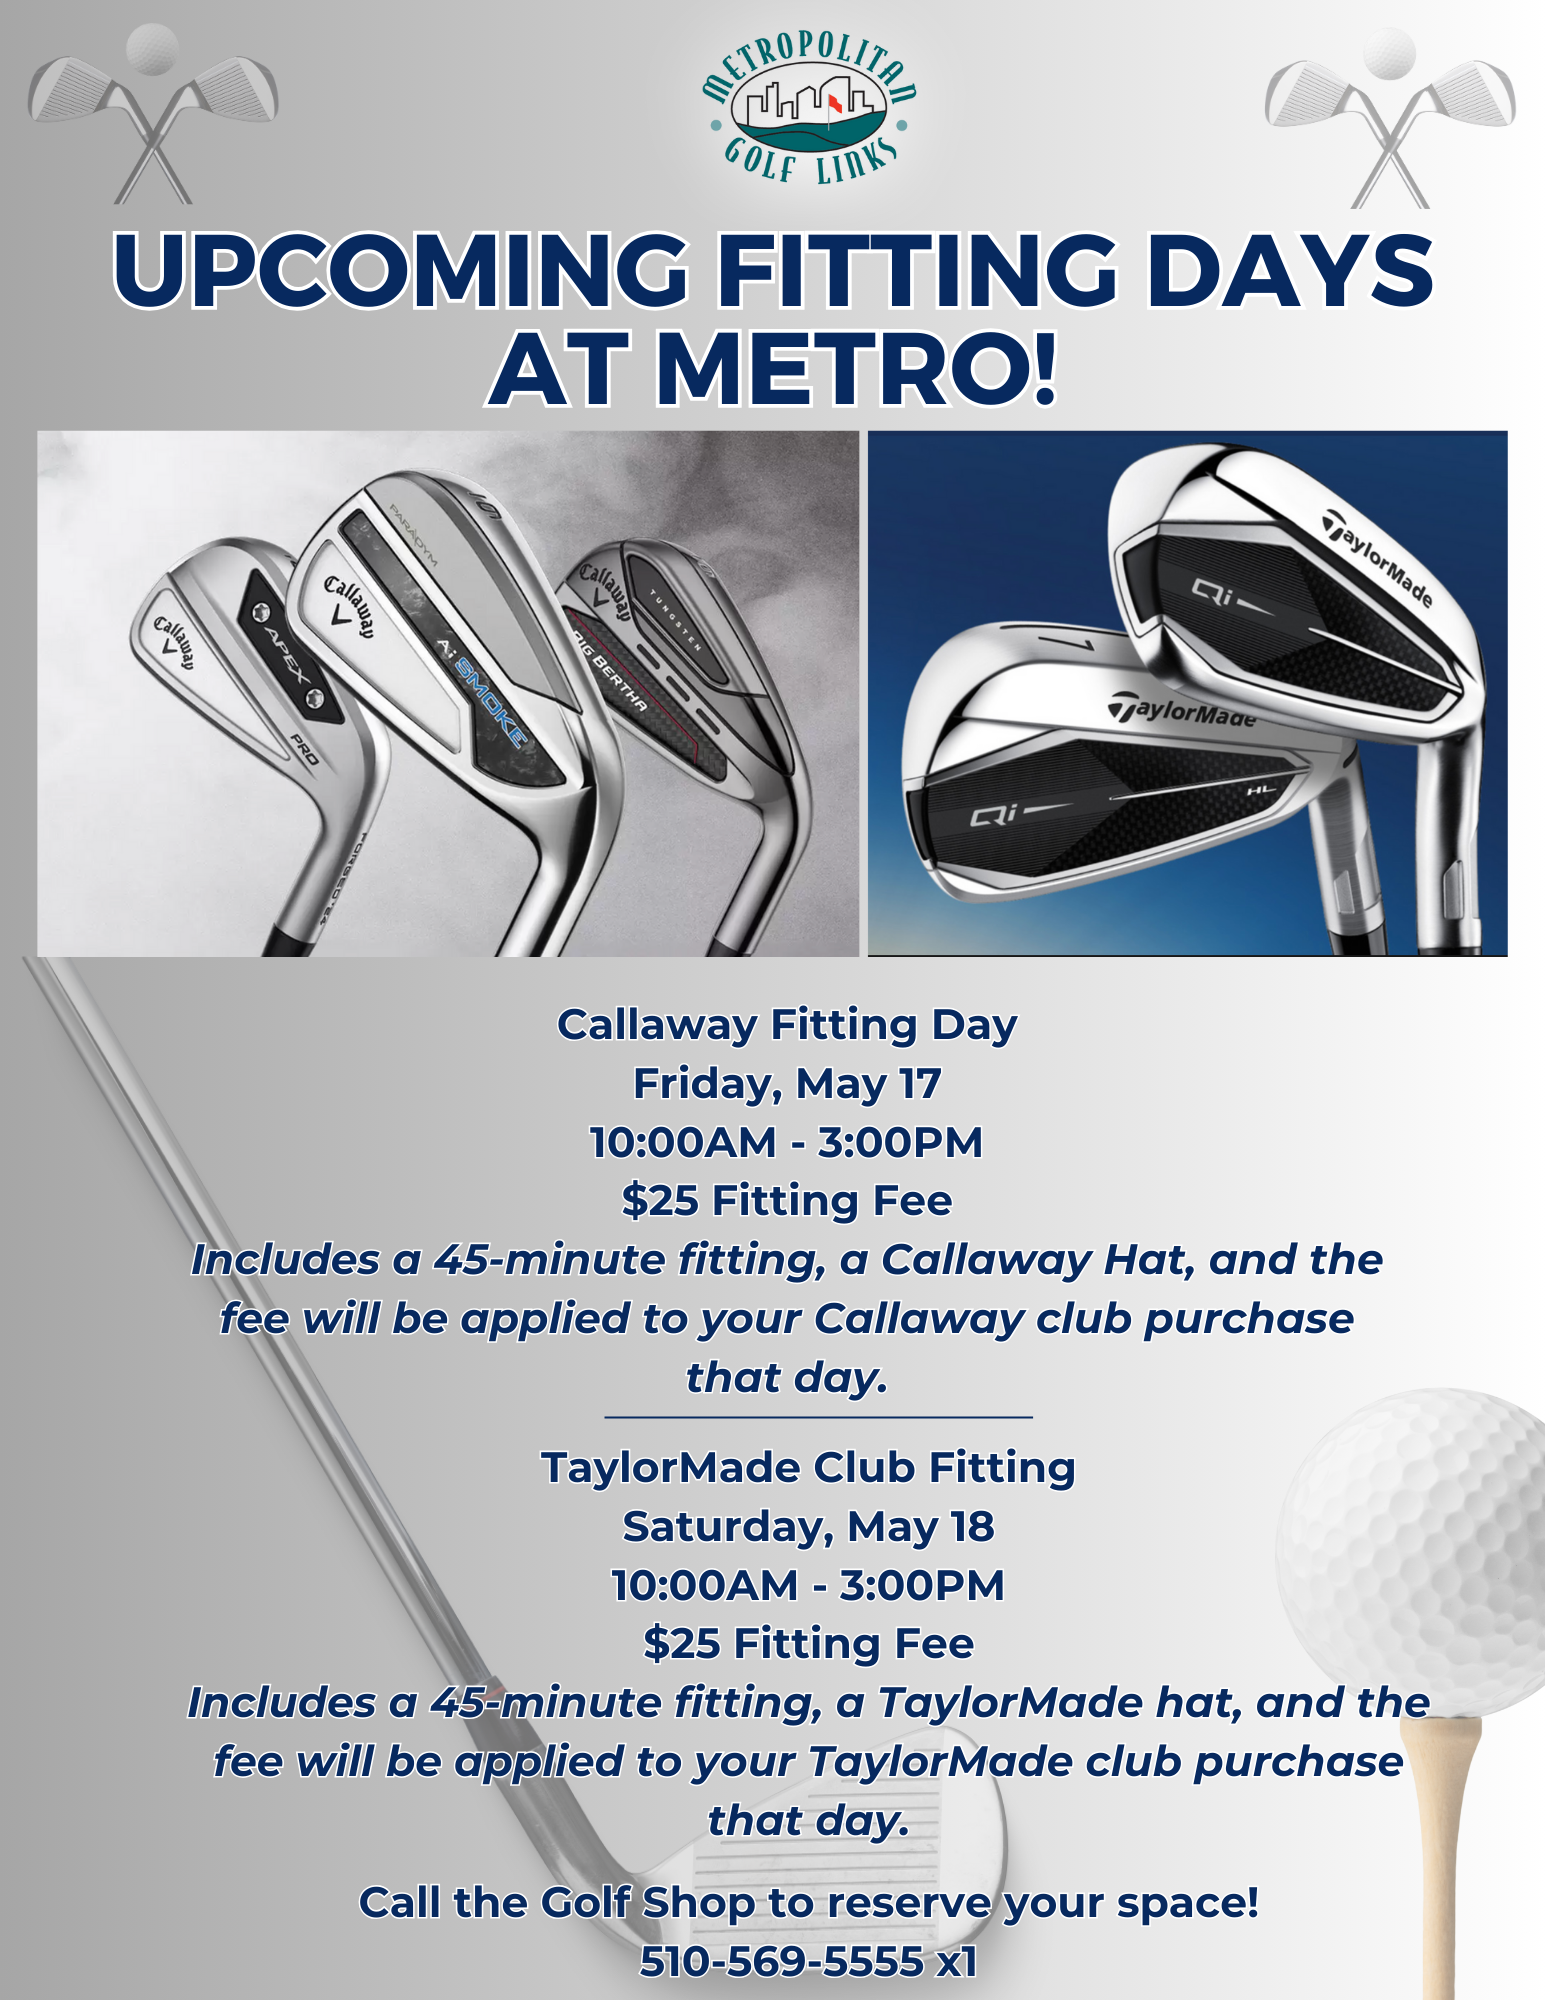 Upcoming Fitting Days Metro Flyer